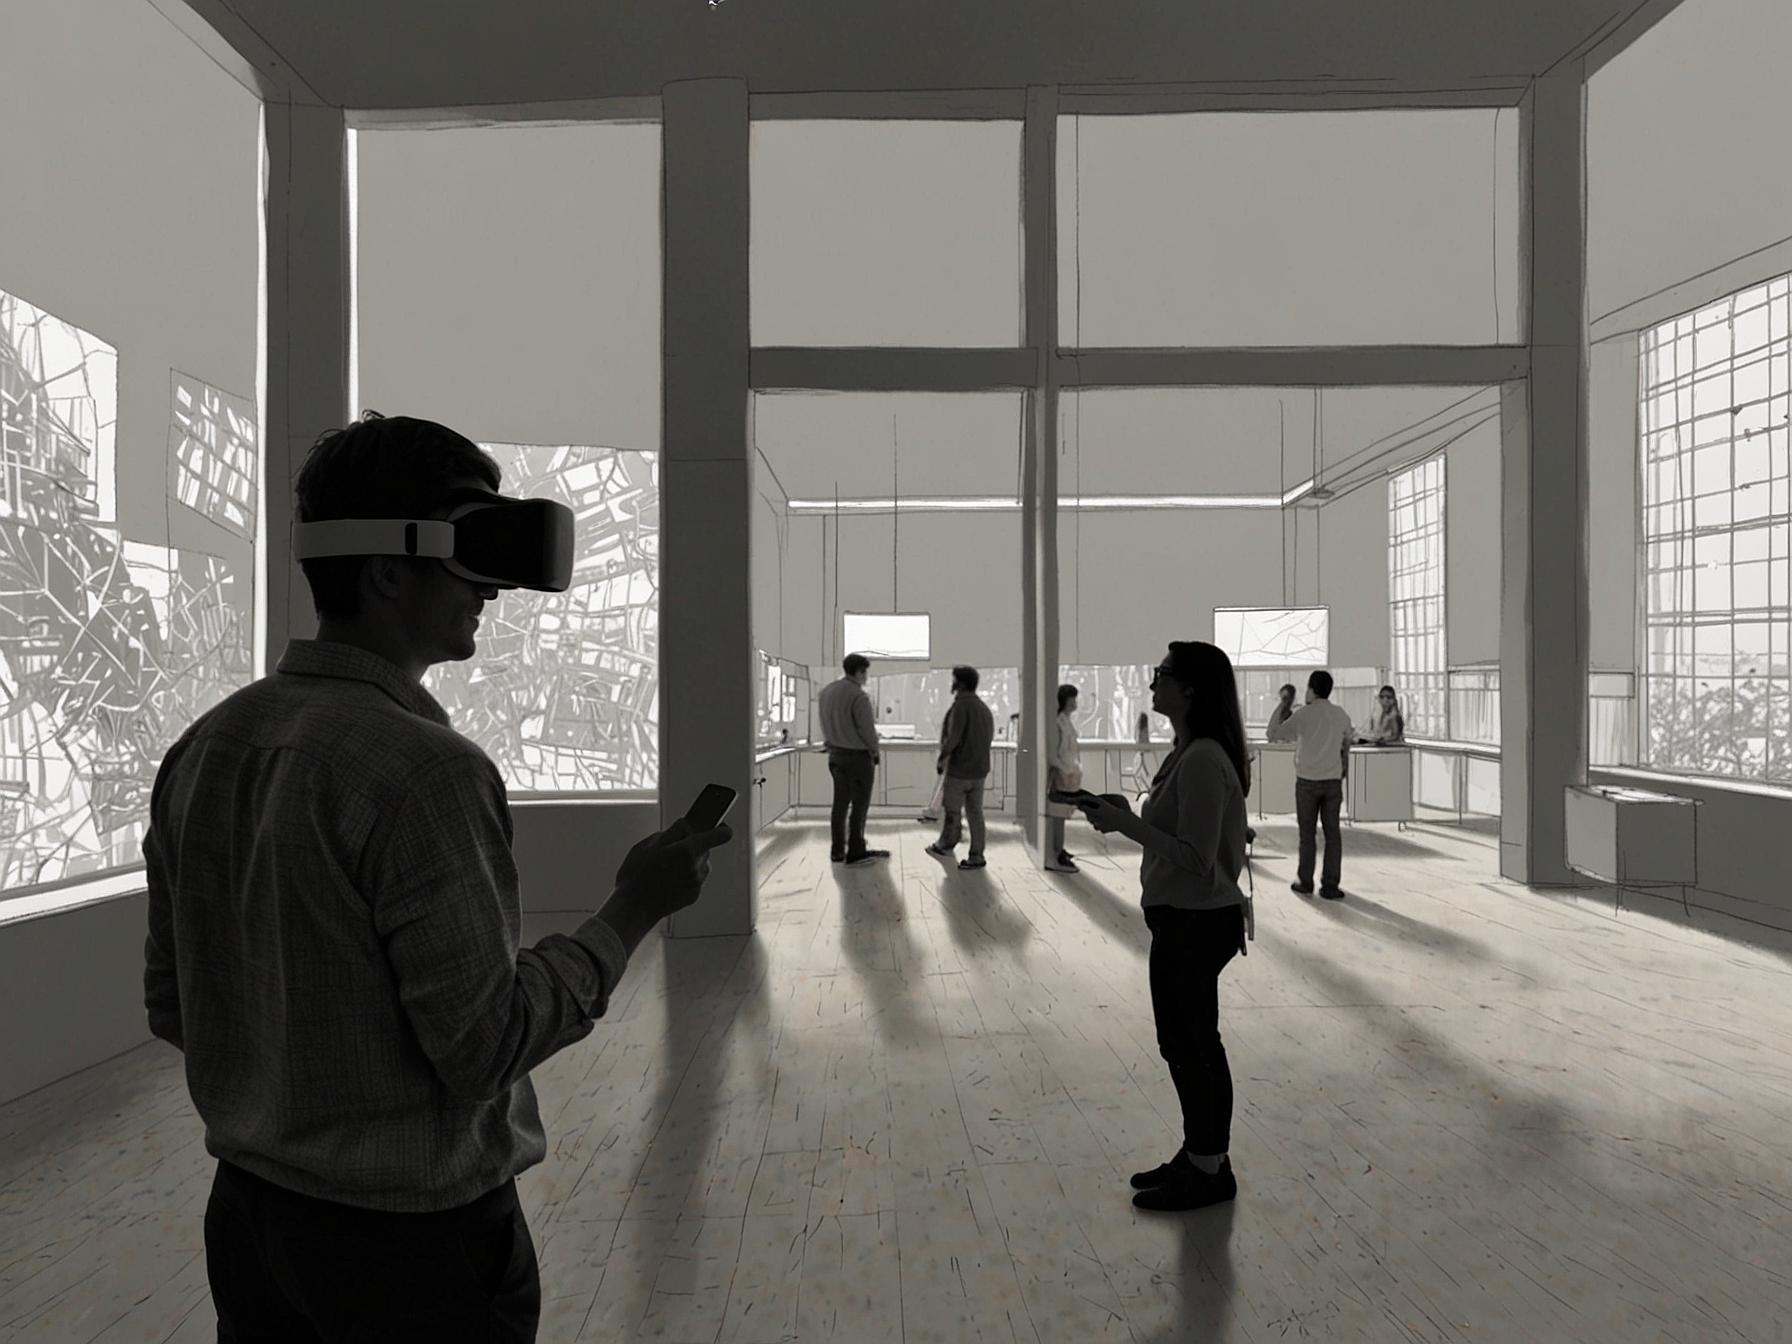 Visitors experience an interactive VR presentation at Seedscape, allowing them to explore unbuilt urban spaces and understand the spatial dynamics, showcasing advanced digital tools in architecture.